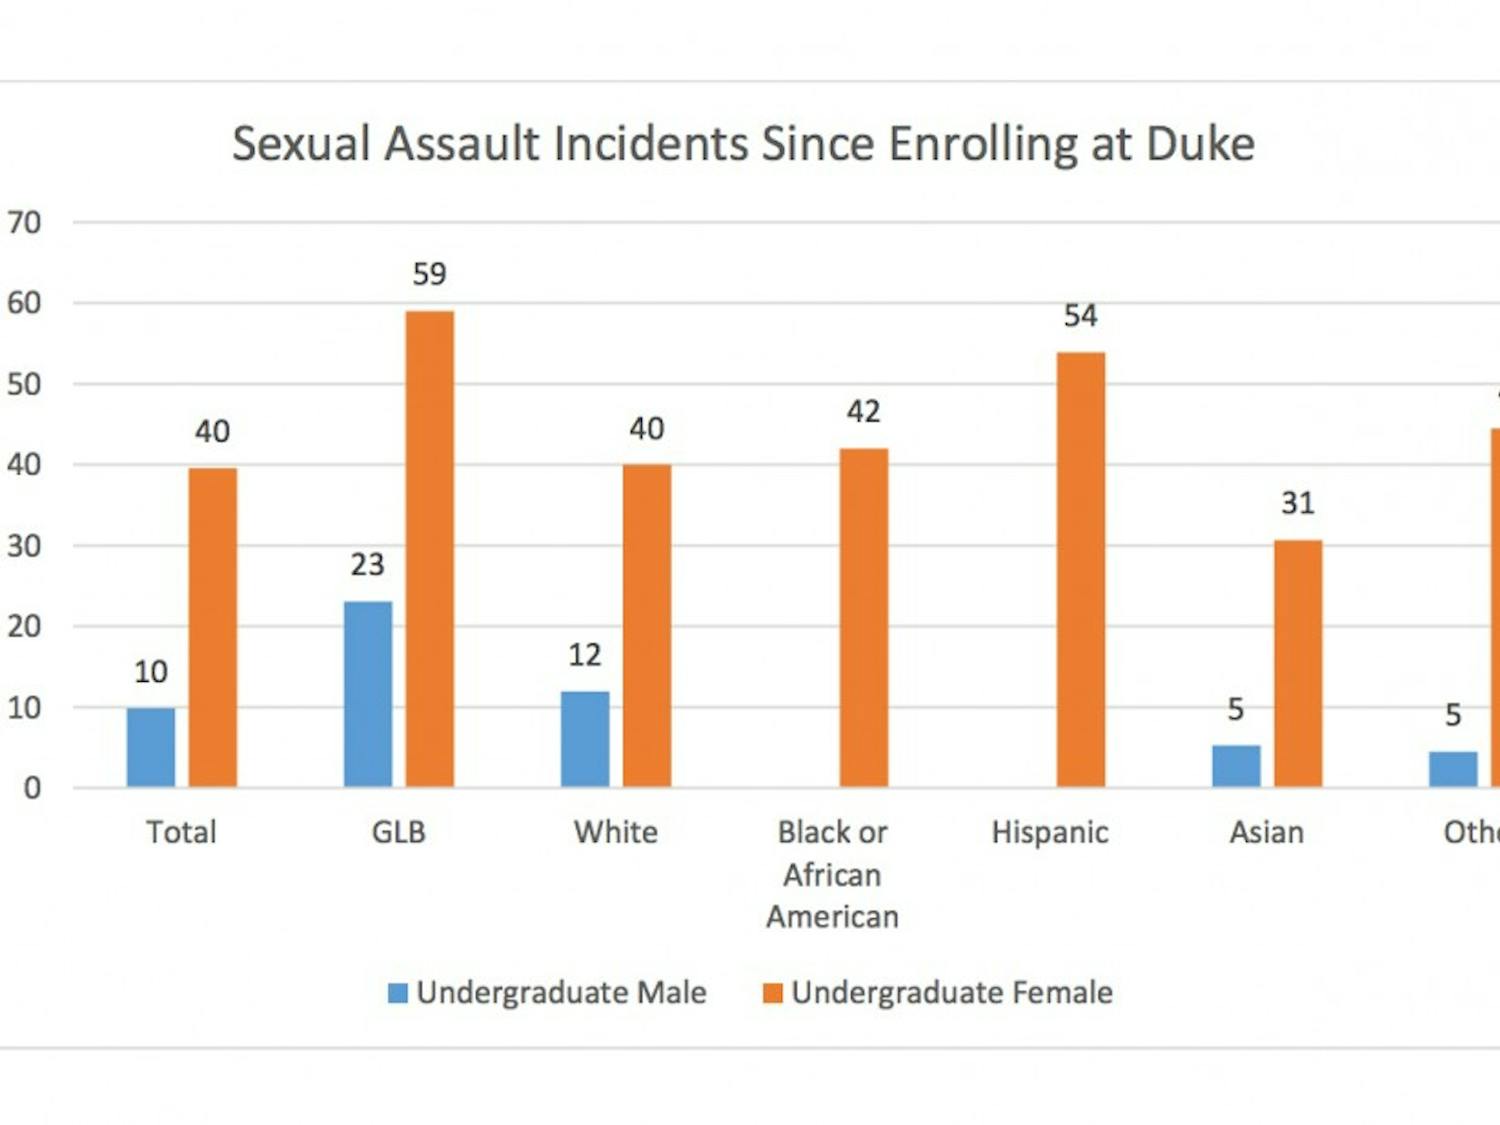 The survey found that 40 percent of undergraduate women at Duke had experienced sexual assault&mdash;two times higher than the national average for undergraduate females.